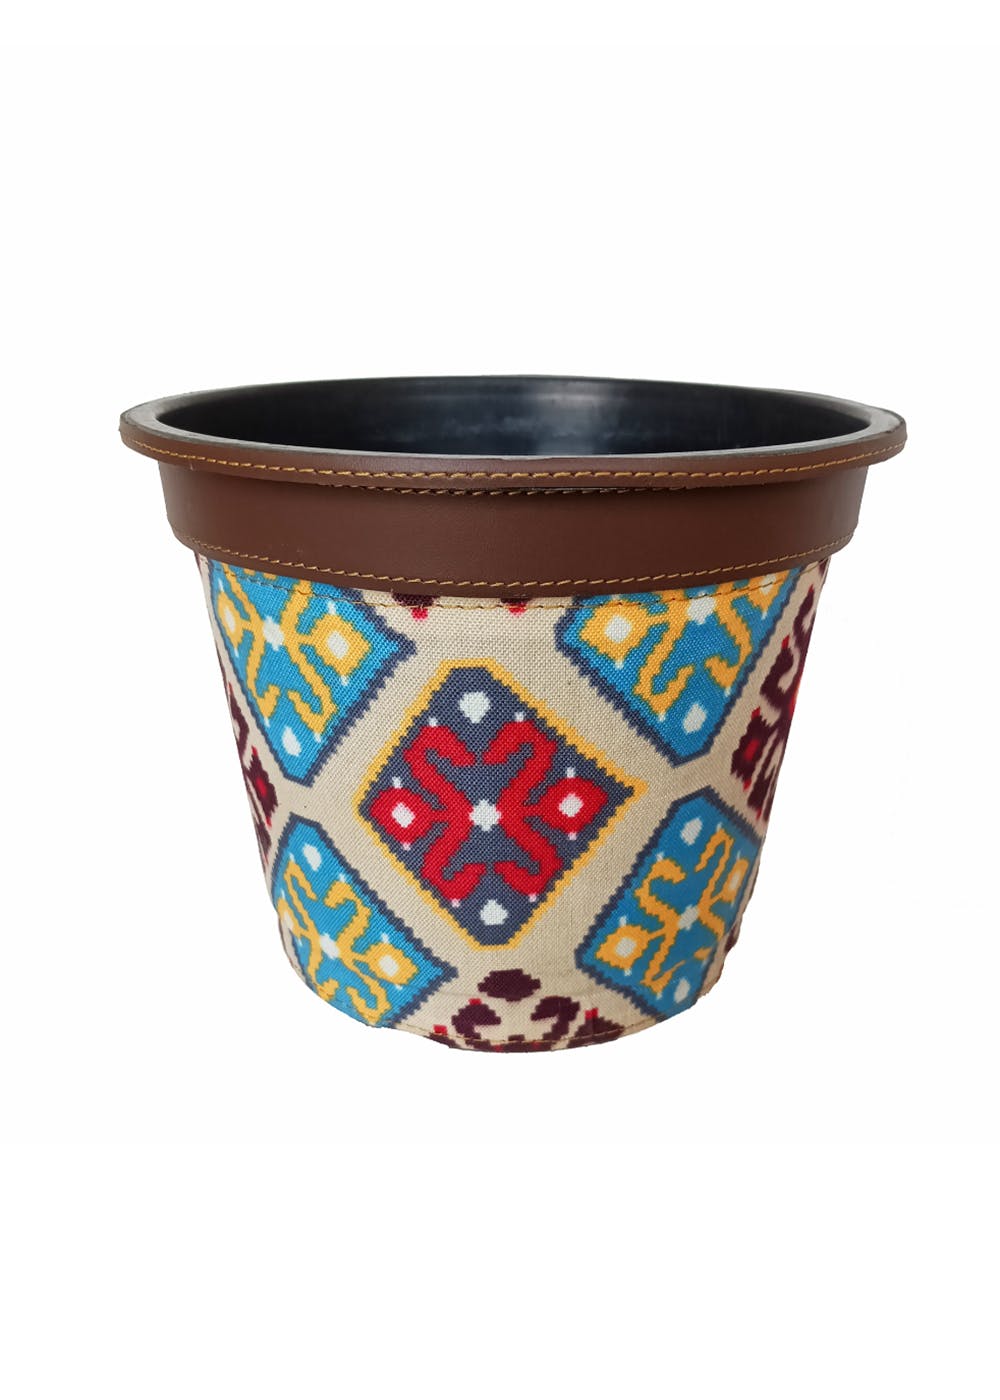 Large Multicolored Embroidered Planter